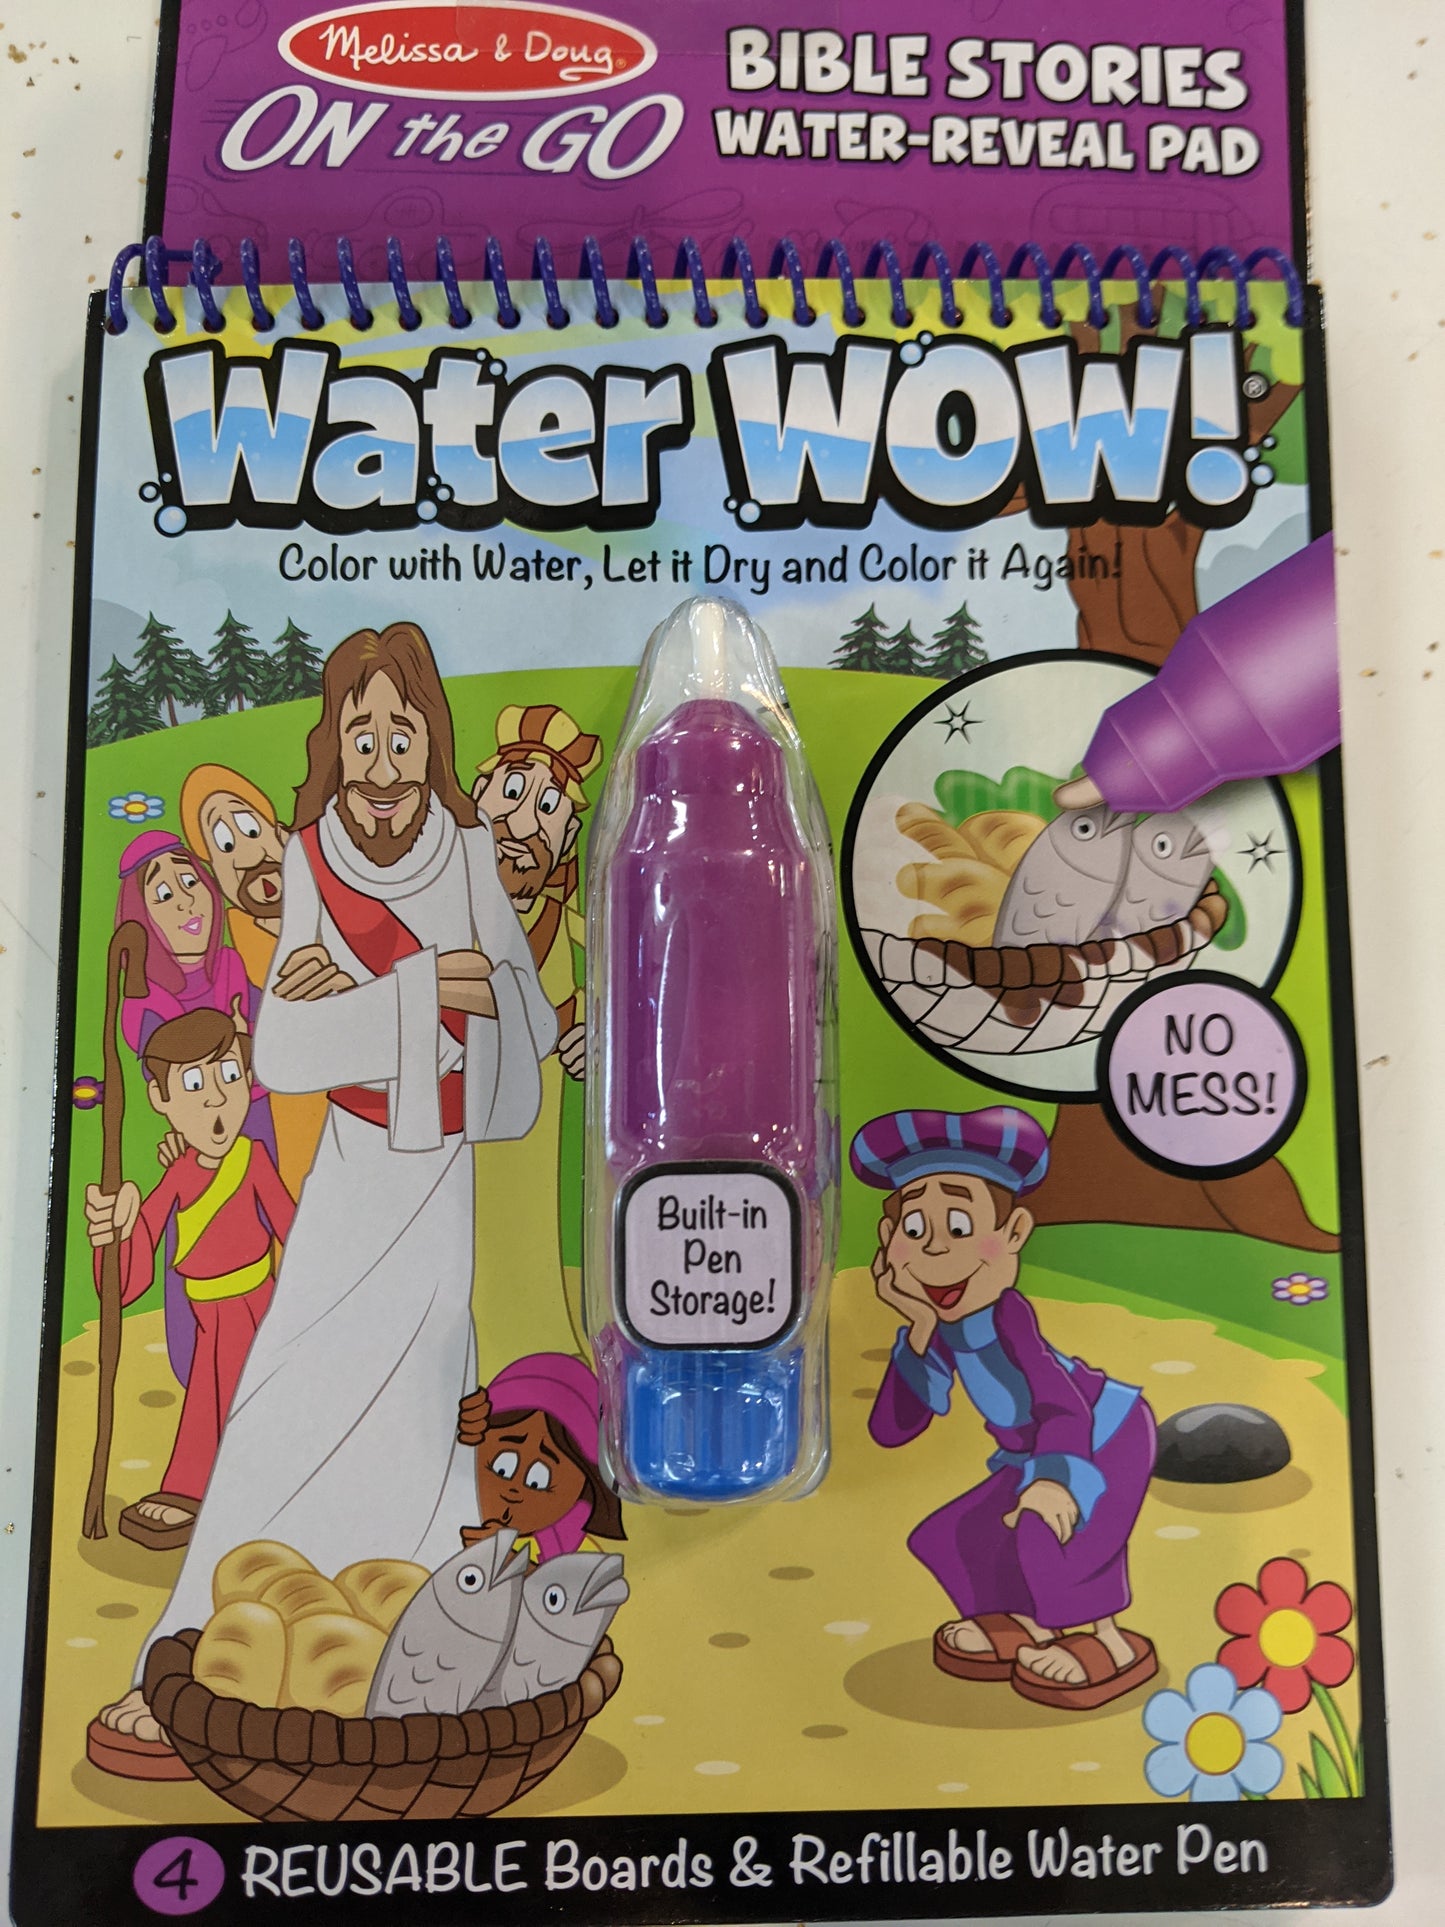 Water Wow - Bible Stories